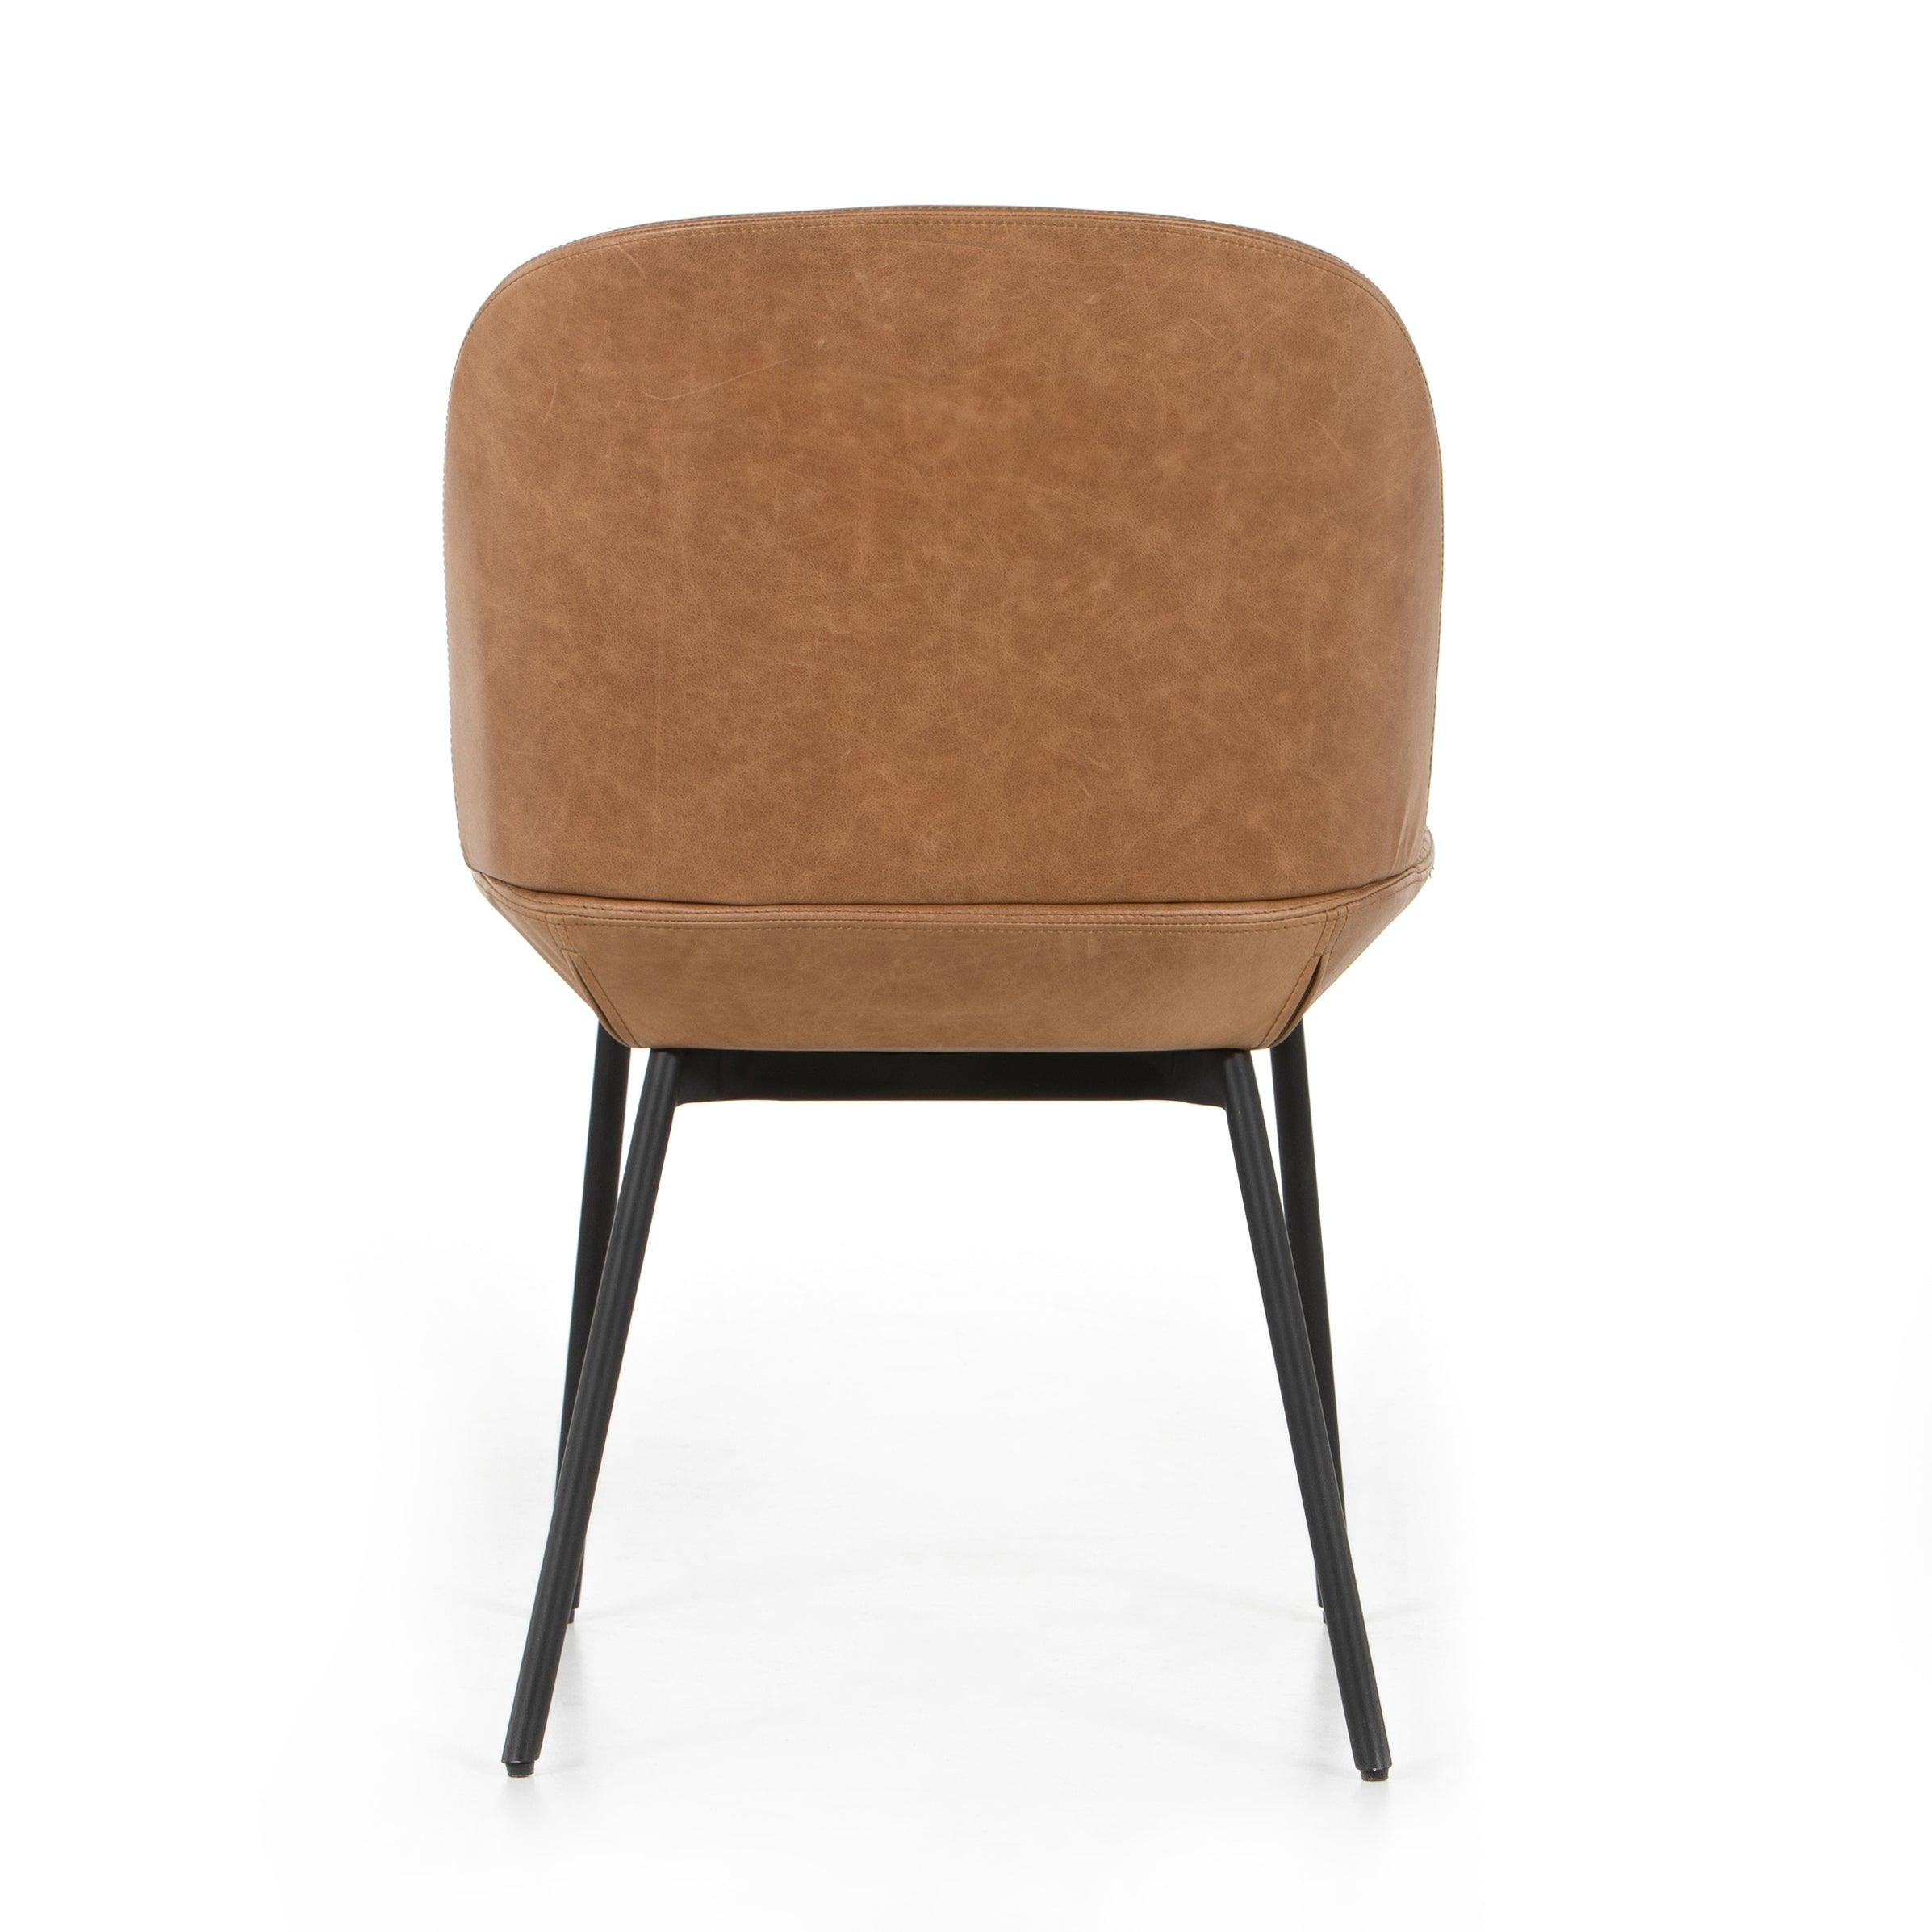 Four Hands FURNITURE - Imani Dining Chair